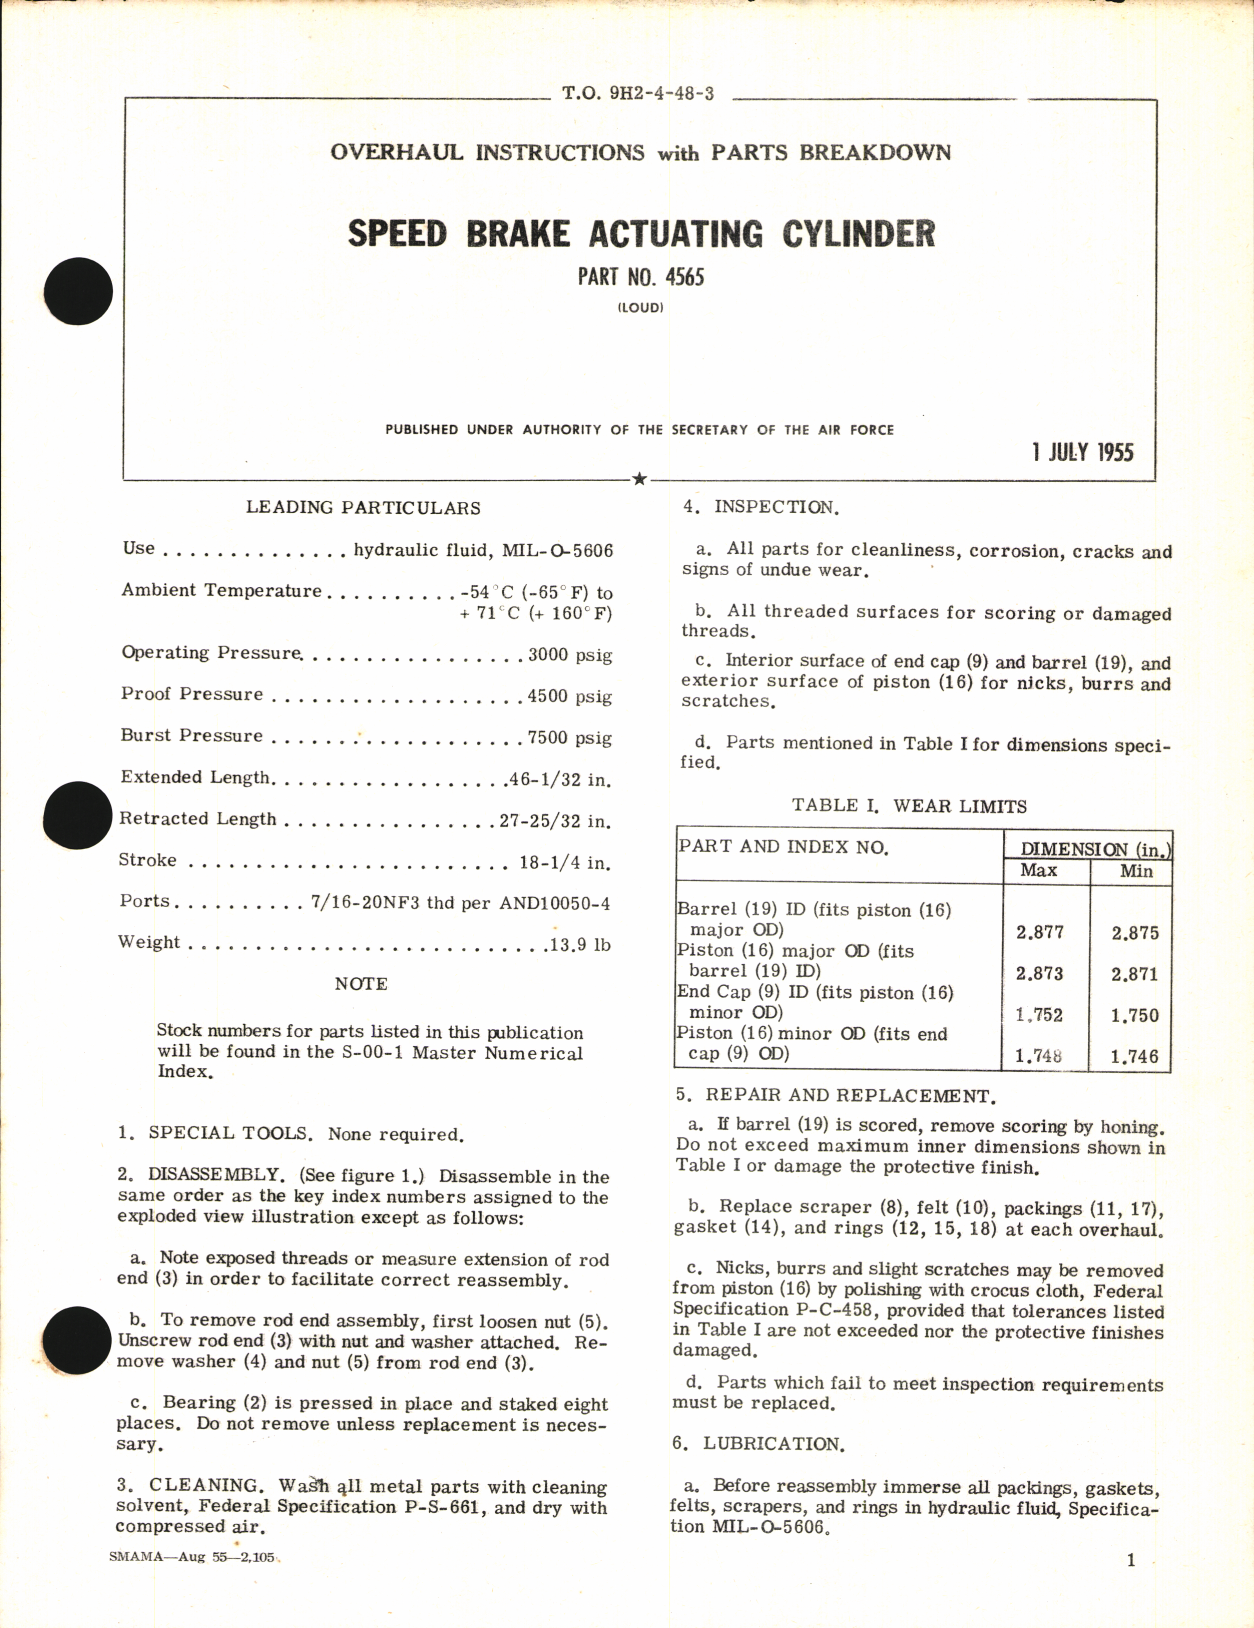 Sample page 1 from AirCorps Library document: Overhaul Instructions with Parts Breakdown for Speed Brake Actuating Cylinder Part No. 4565